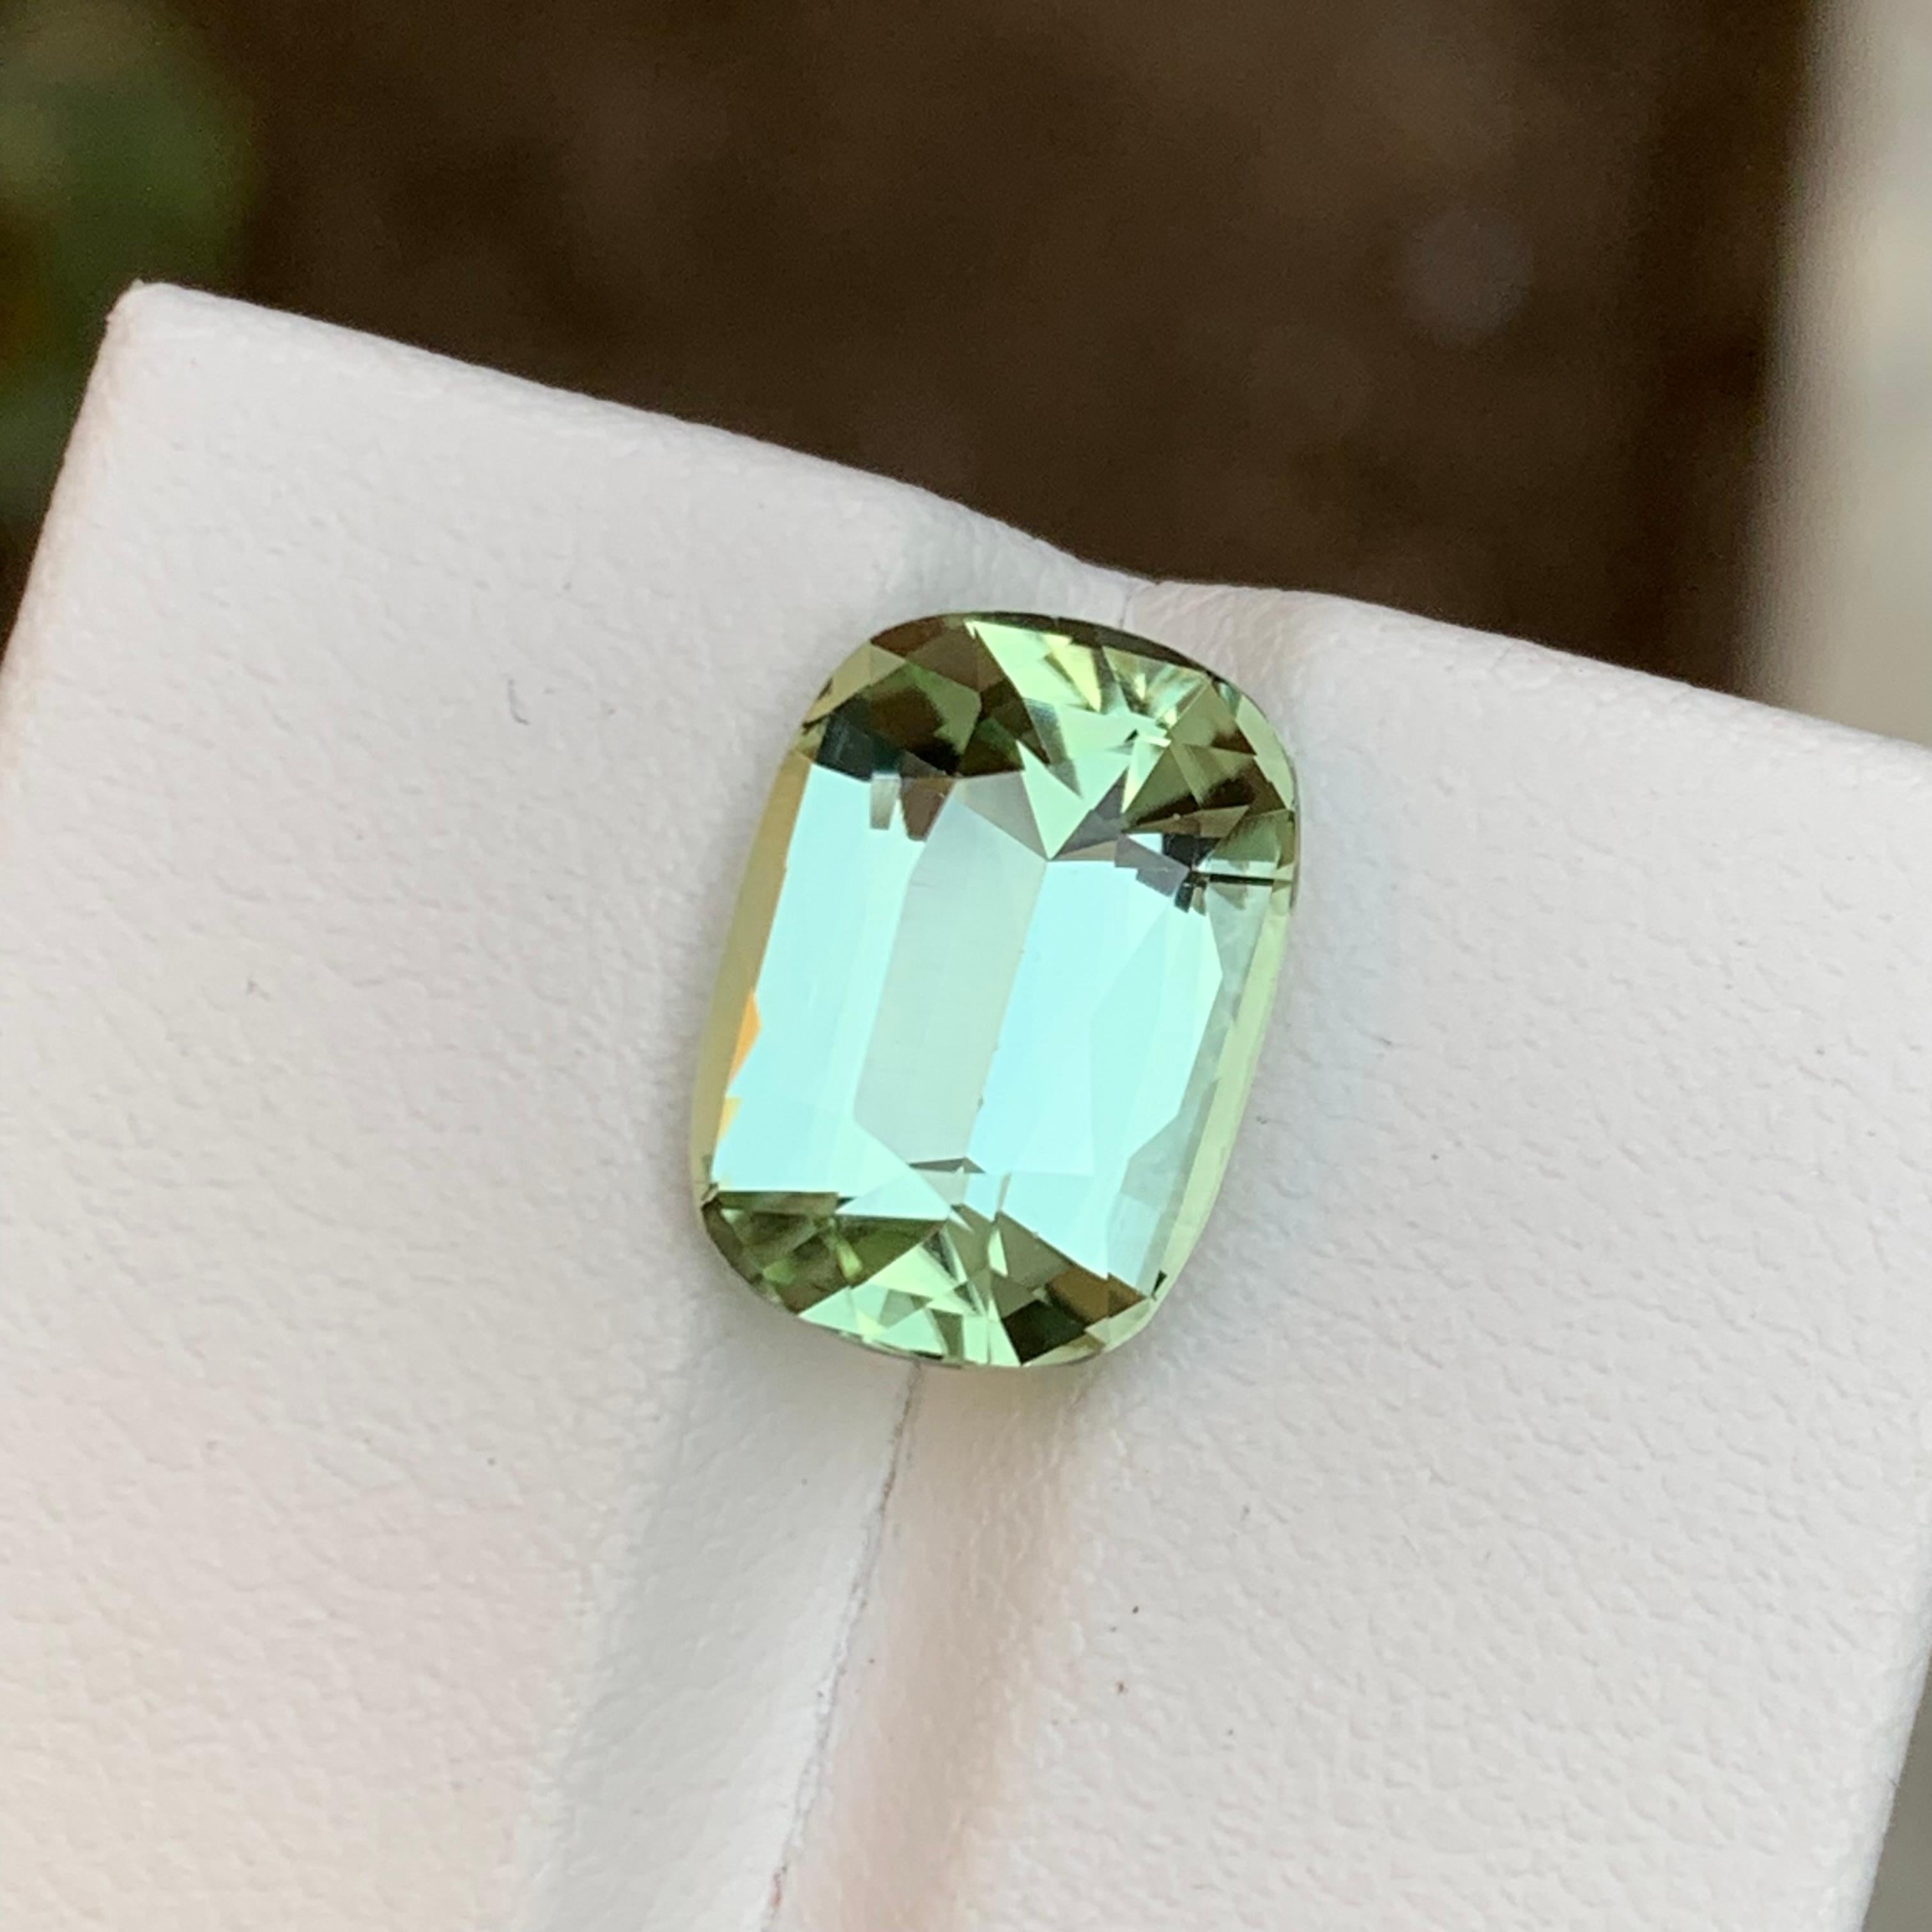 Pale Green Natural Tourmaline Gemstone 5.35 Ct Step Cushion Cut for Ring/Pendant For Sale 8